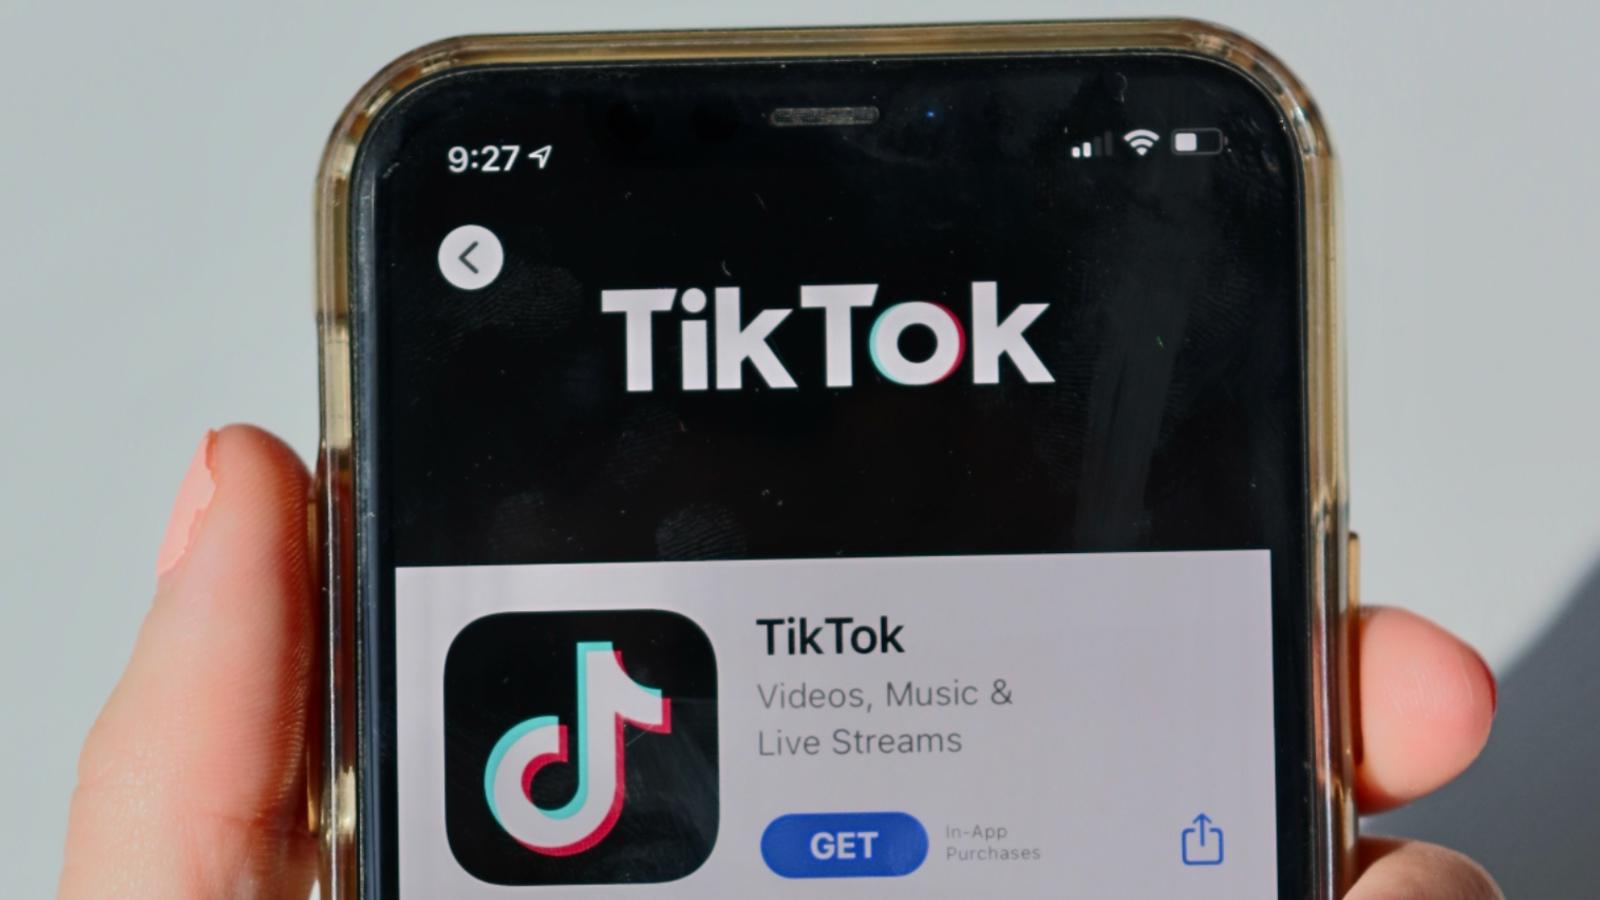 Page for the TikTok app on a phone